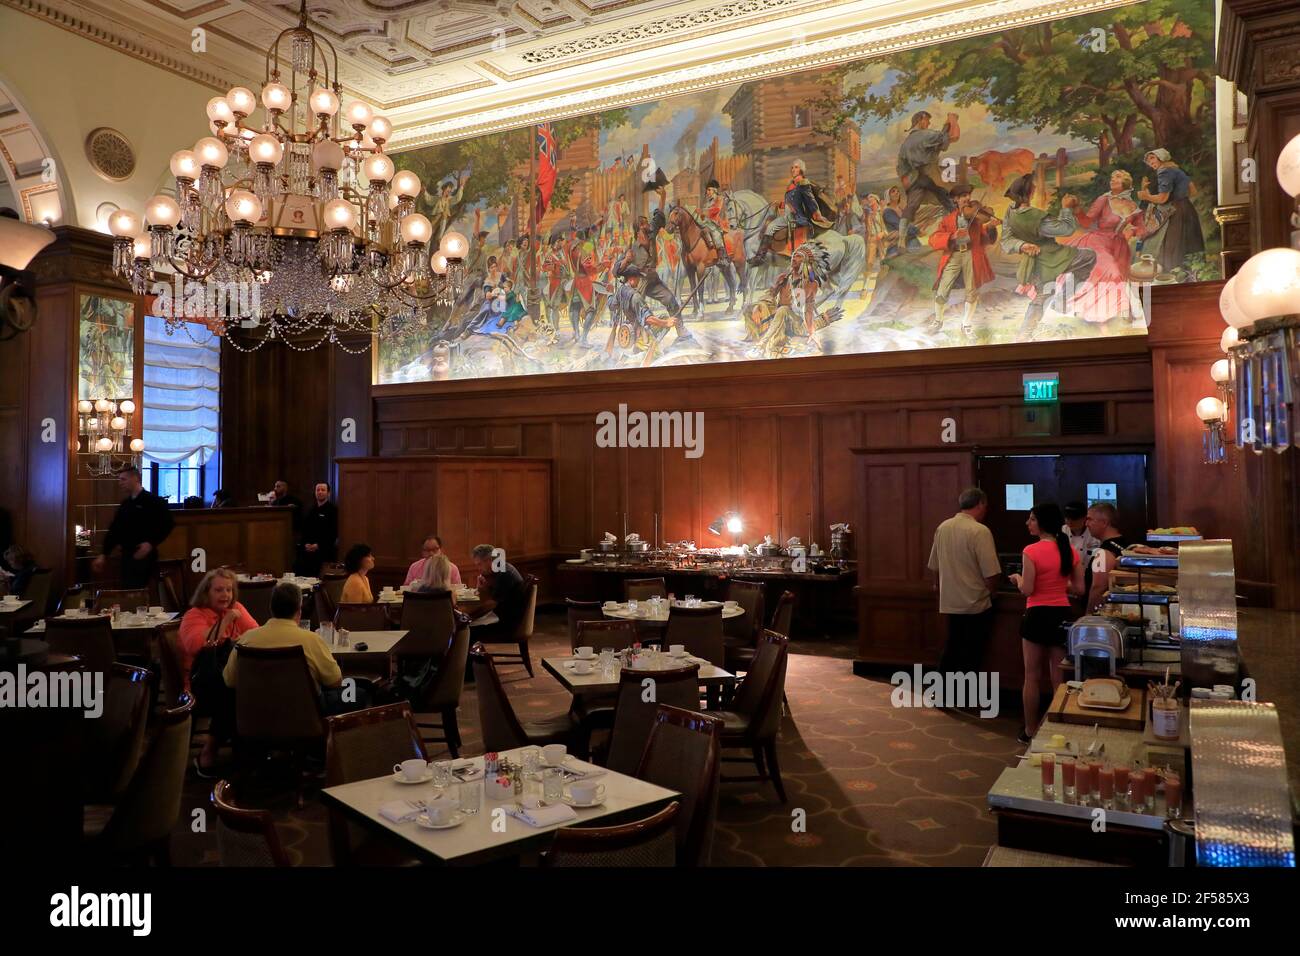 The taking of Fort Pitt mural decorating the Terrace Room dining room of Omni William Penn Hotel.Pittsburgh.Pennsylvania.USA Stock Photo